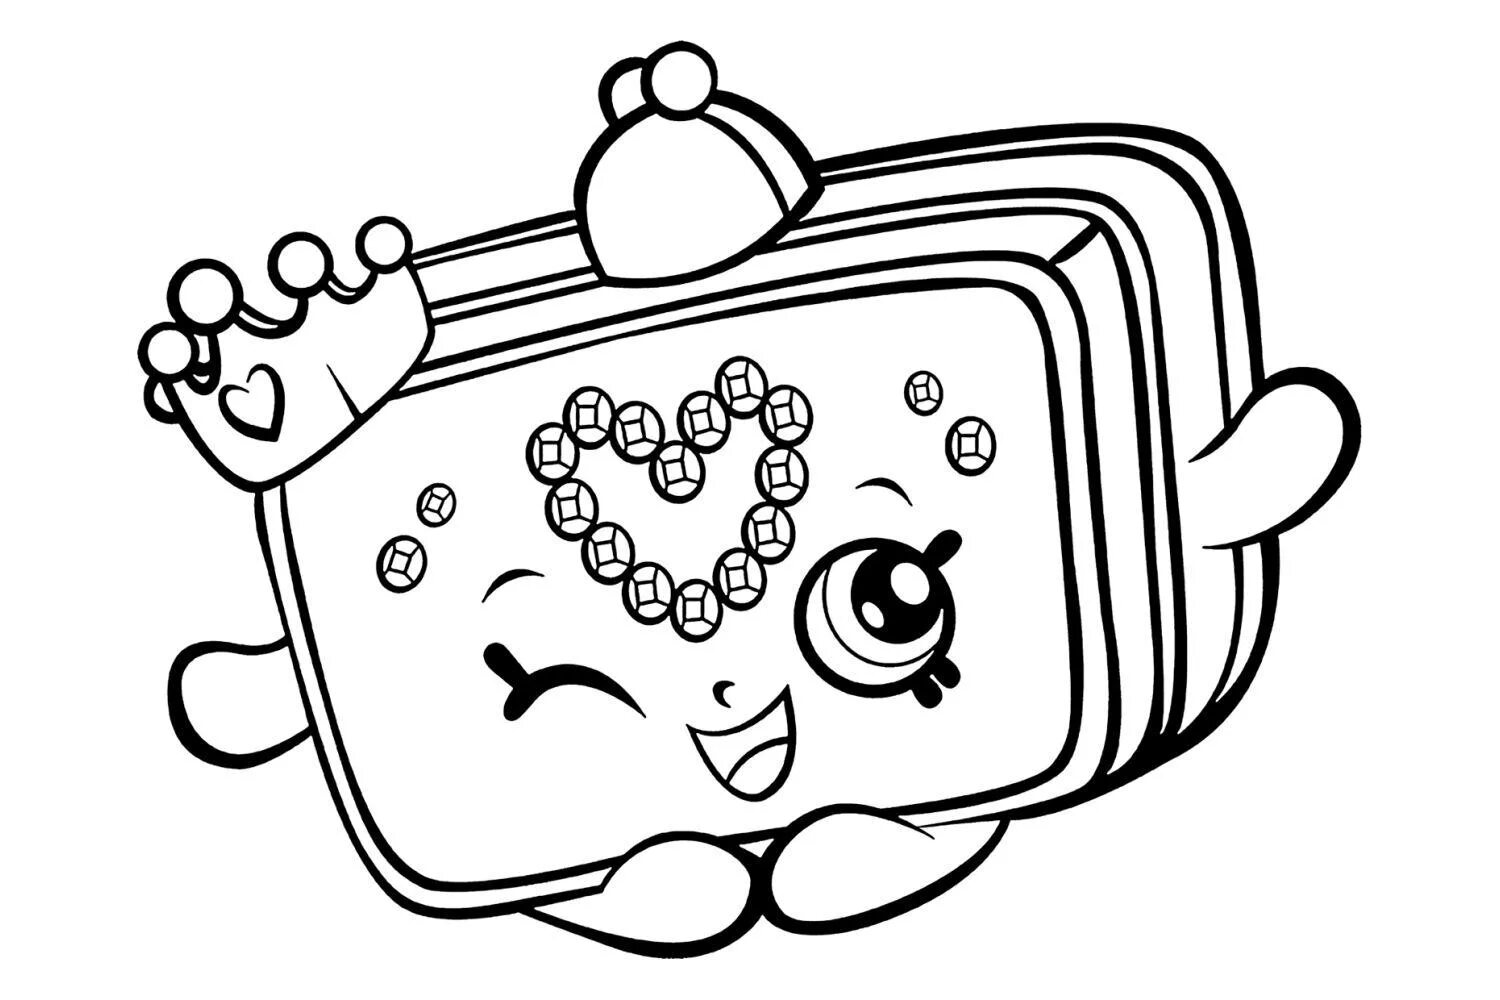 Shopkins coloring pages for girls